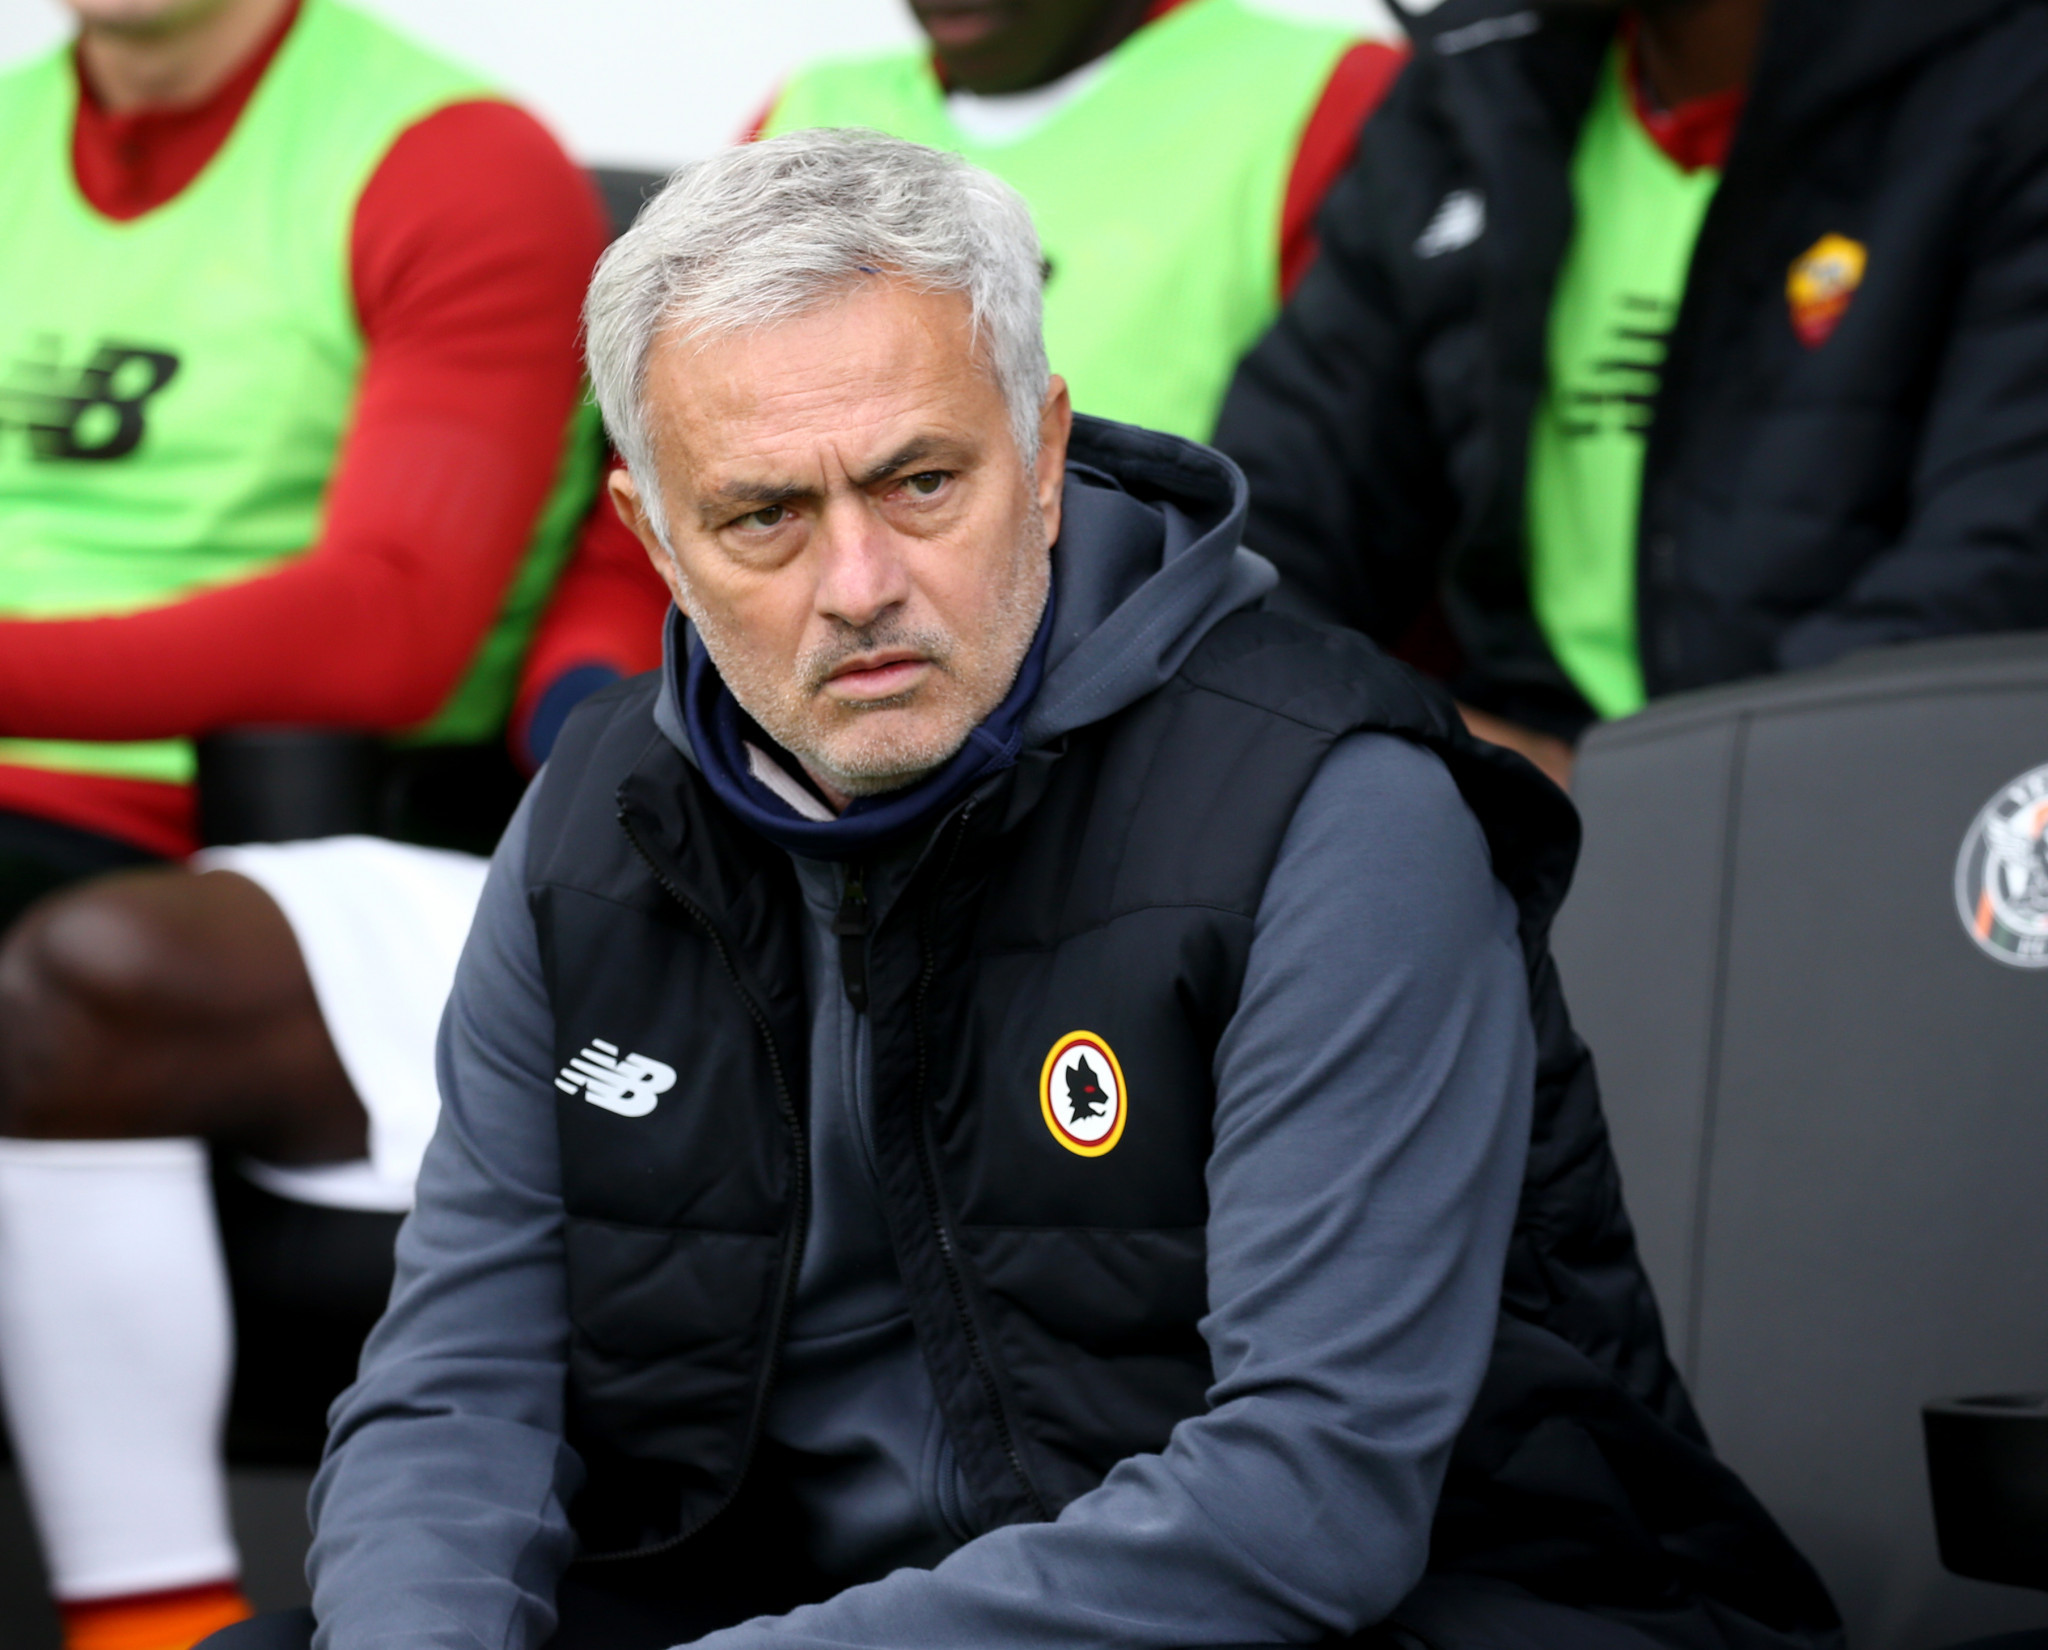 Jose Mourinho has reportedly been reluctant to embrace data and sports science ©Getty Images